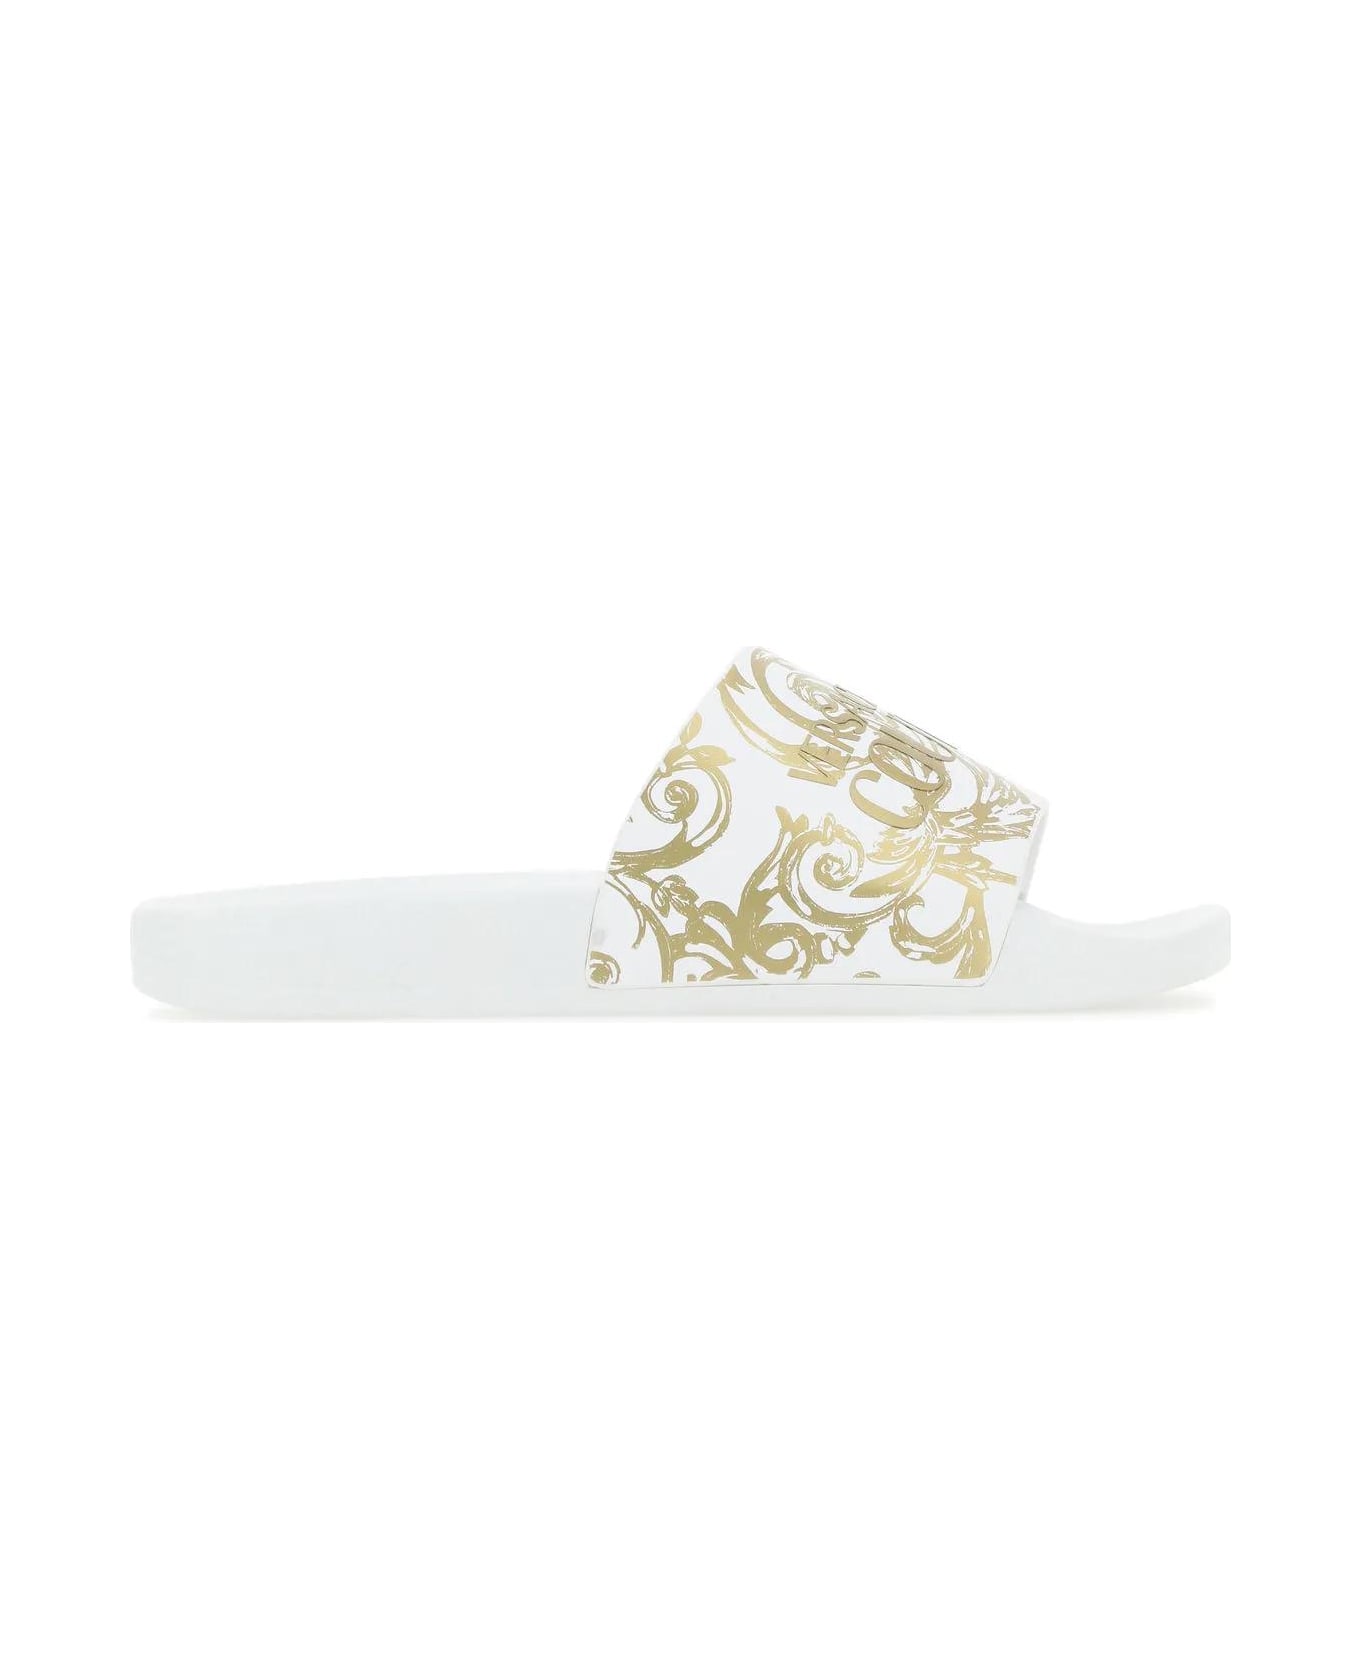 Versace Jeans Couture Printed Rubber Slippers - White/gold